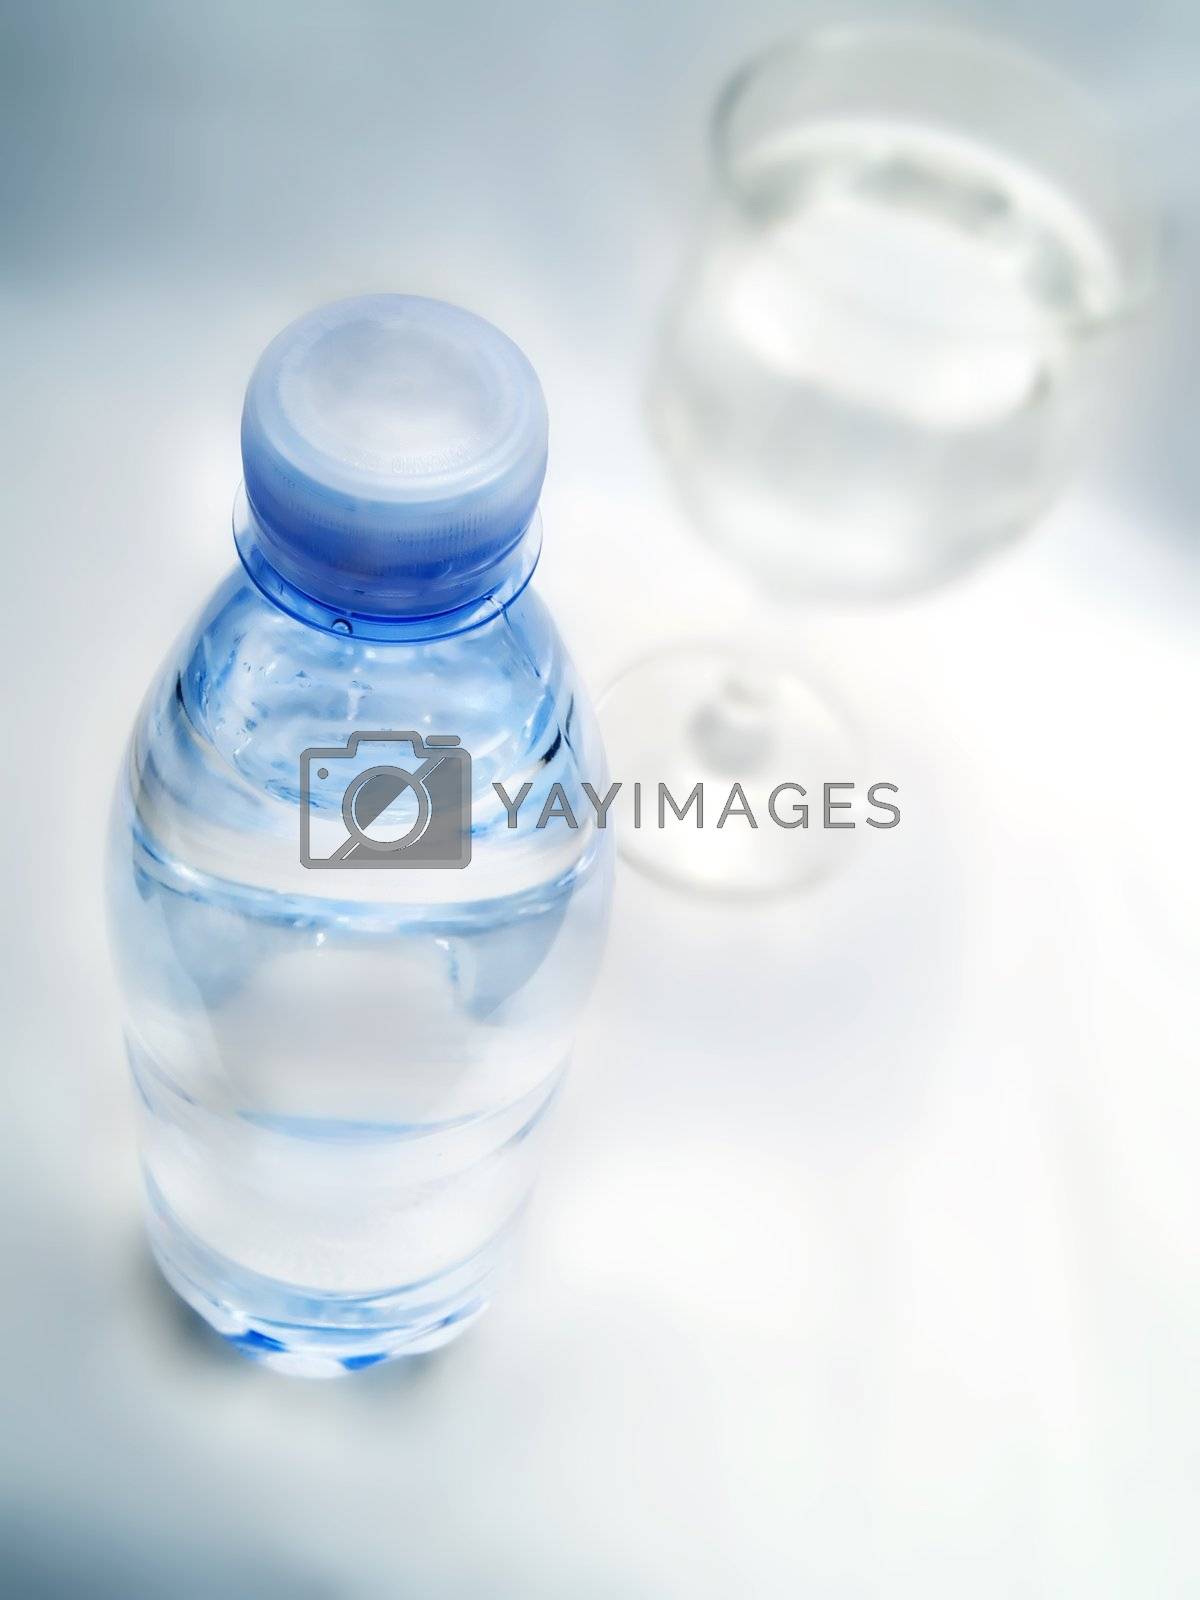 Royalty free image of Bottle of water by henrischmit